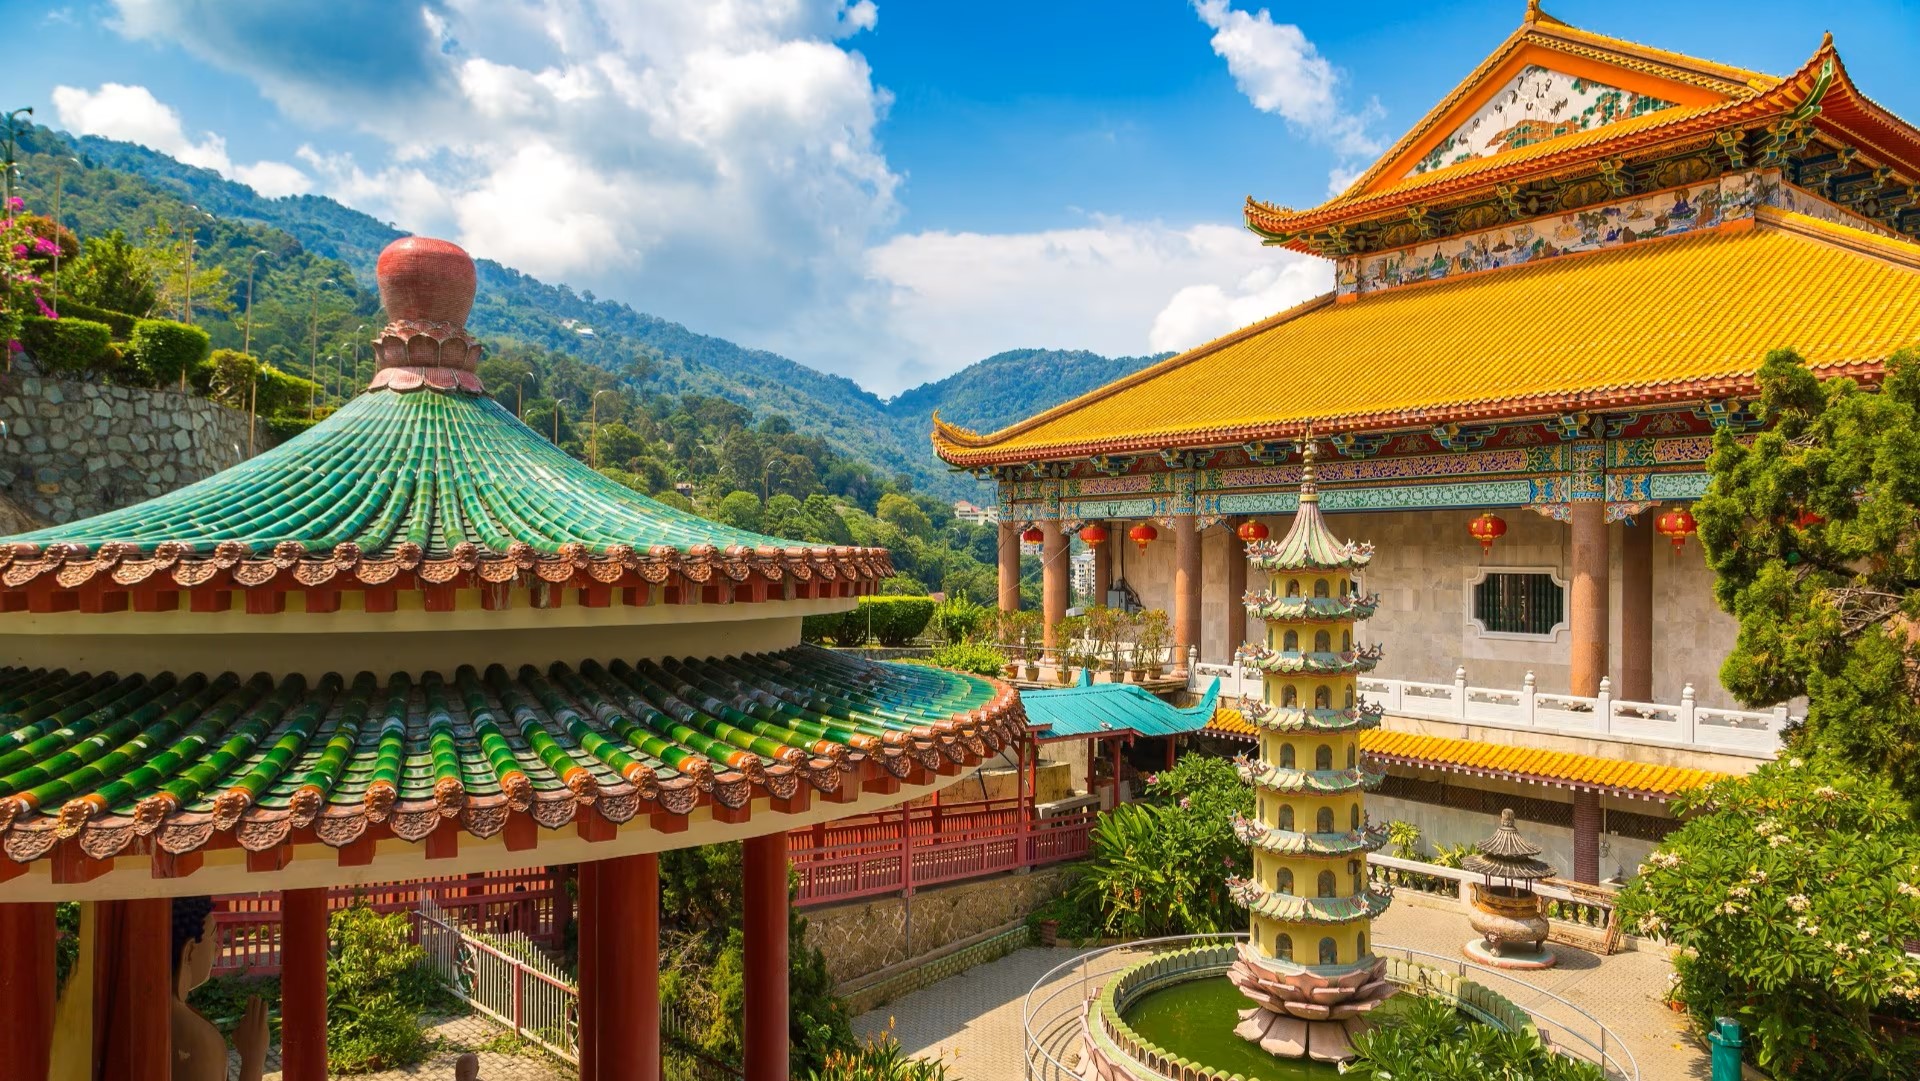 The Magnificent Kek Lok Si Temple in Penang, Malaysia